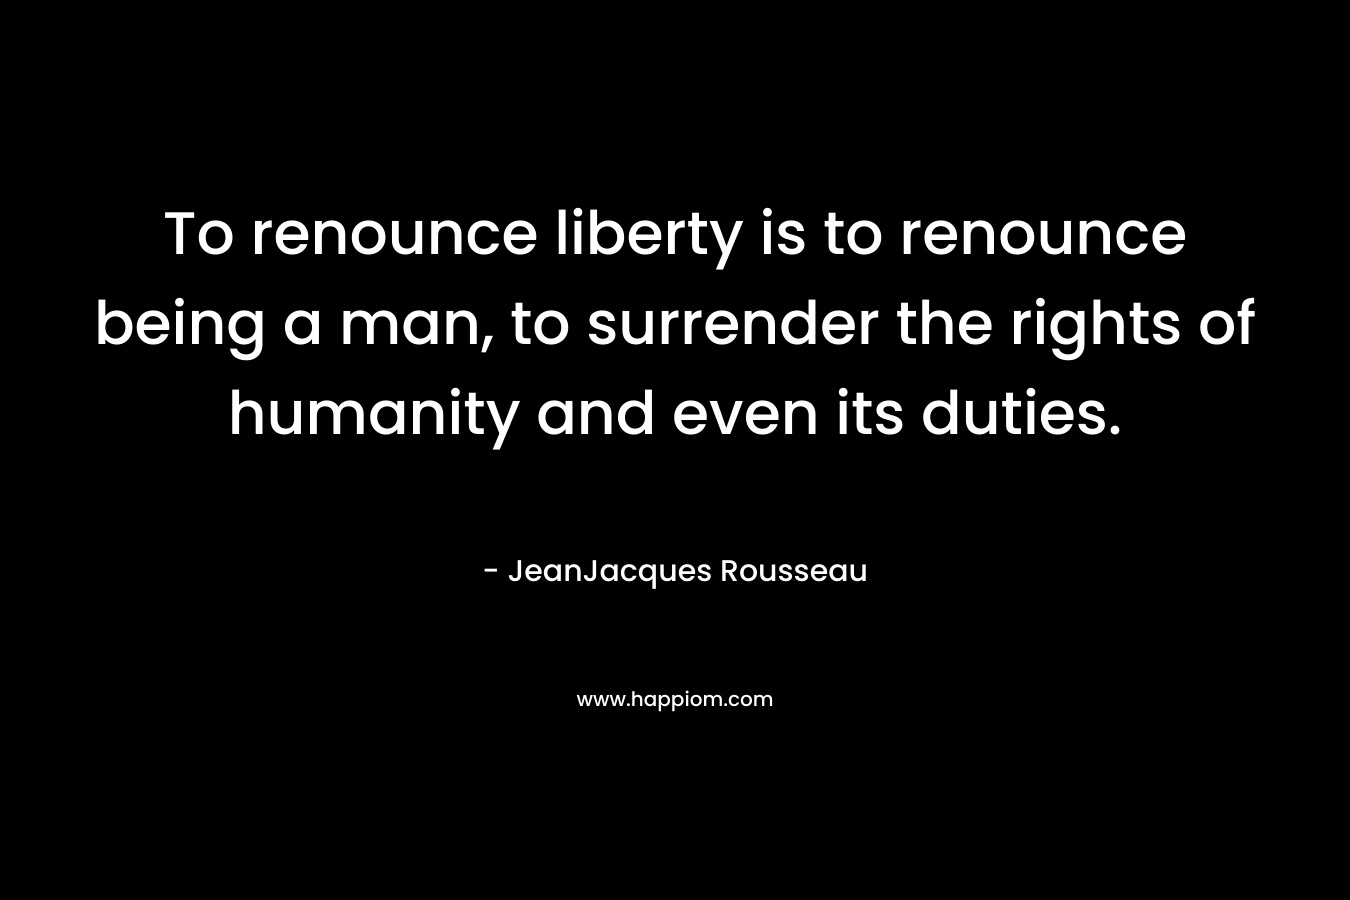 To renounce liberty is to renounce being a man, to surrender the rights of humanity and even its duties. – JeanJacques Rousseau